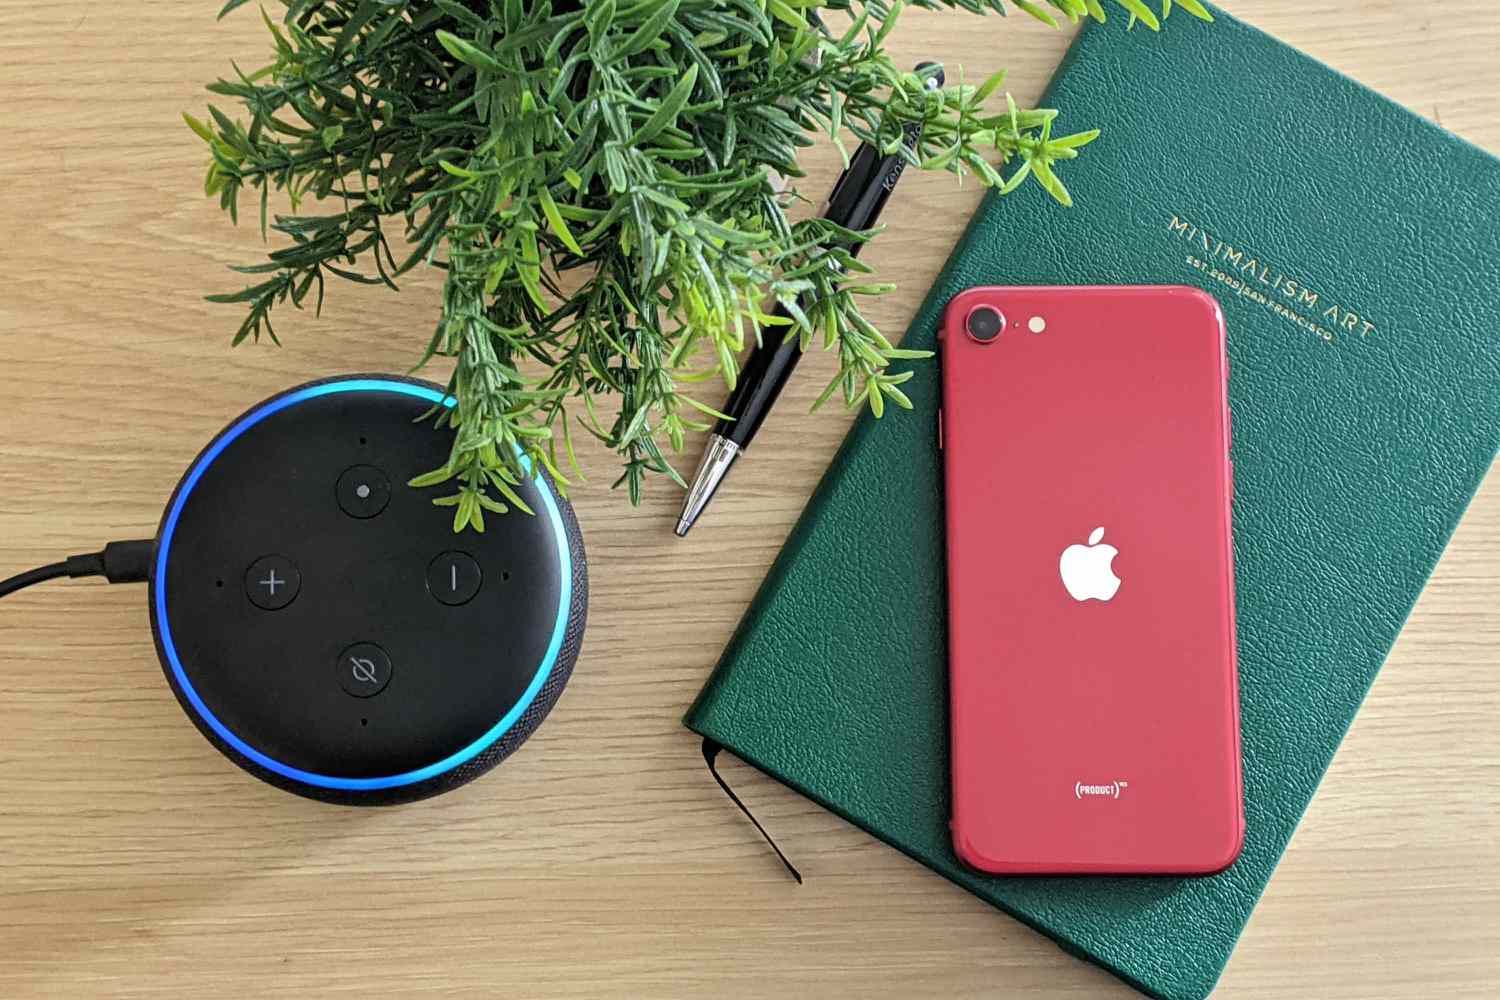 connecting-iphone-to-alexa-speaker-a-how-to-guide